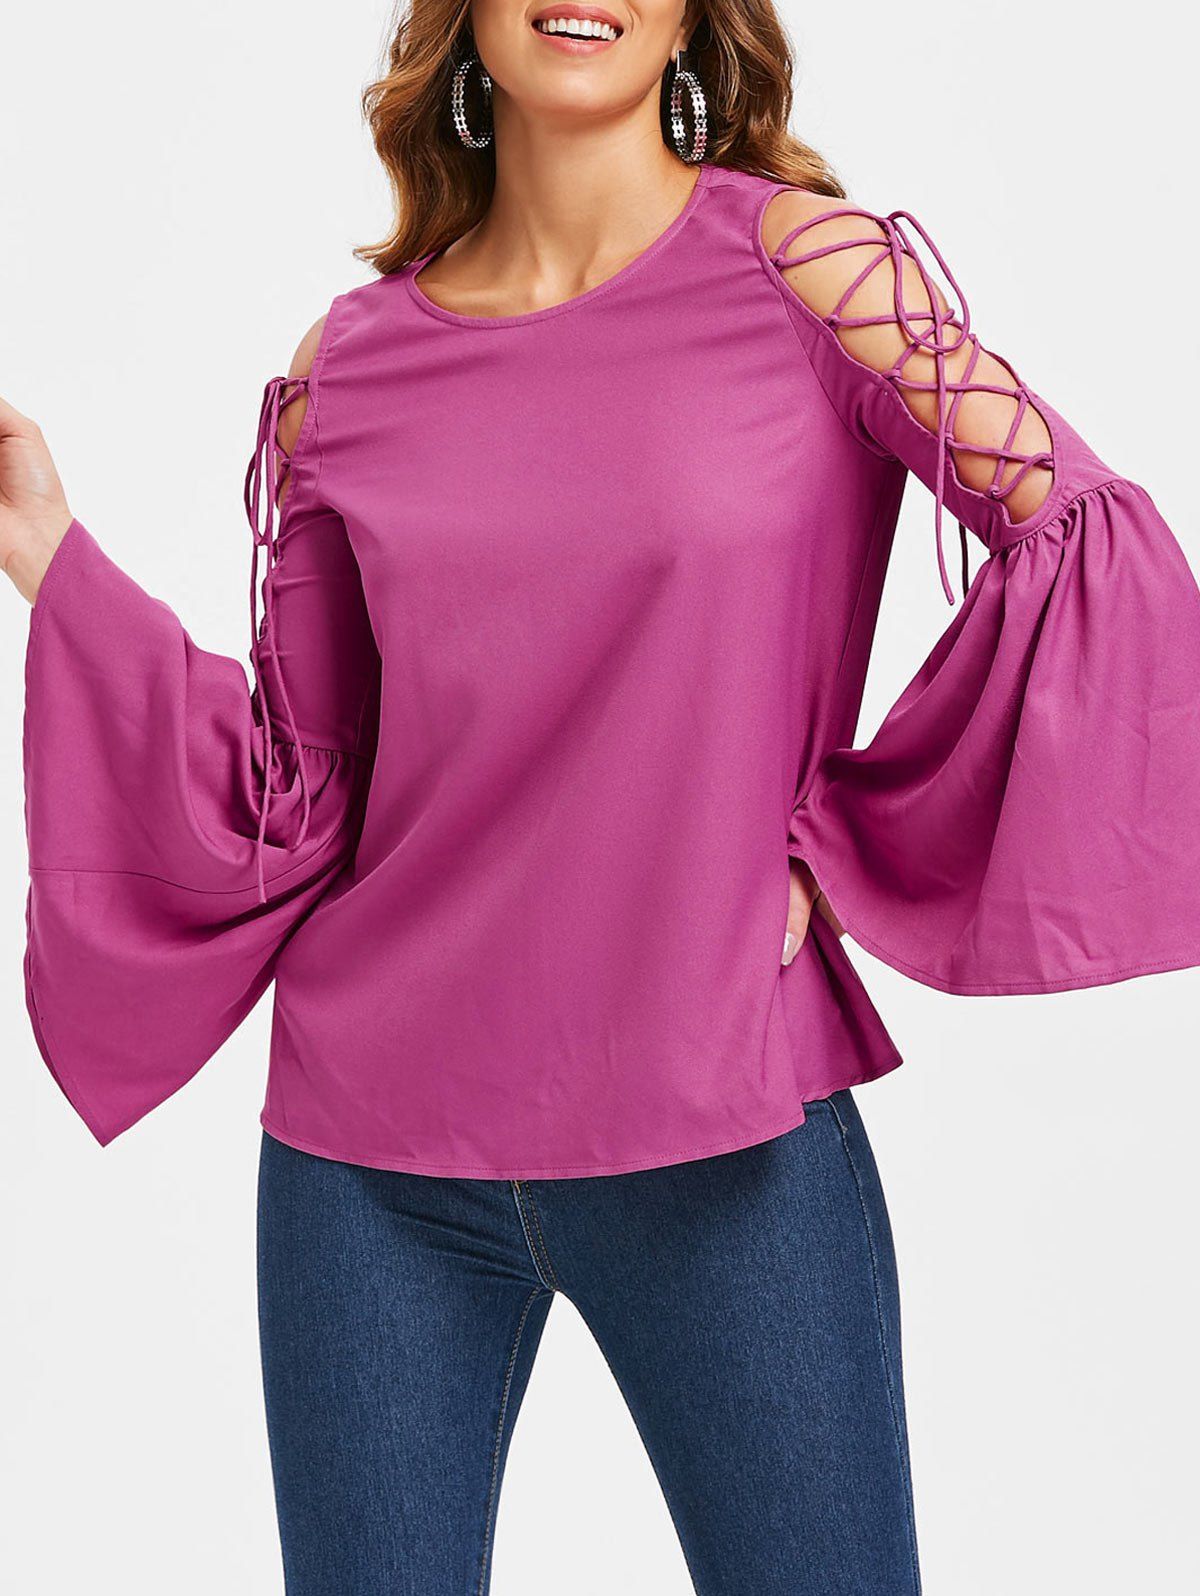 Lace Up Flare Sleeve Tee - ROSE RED M